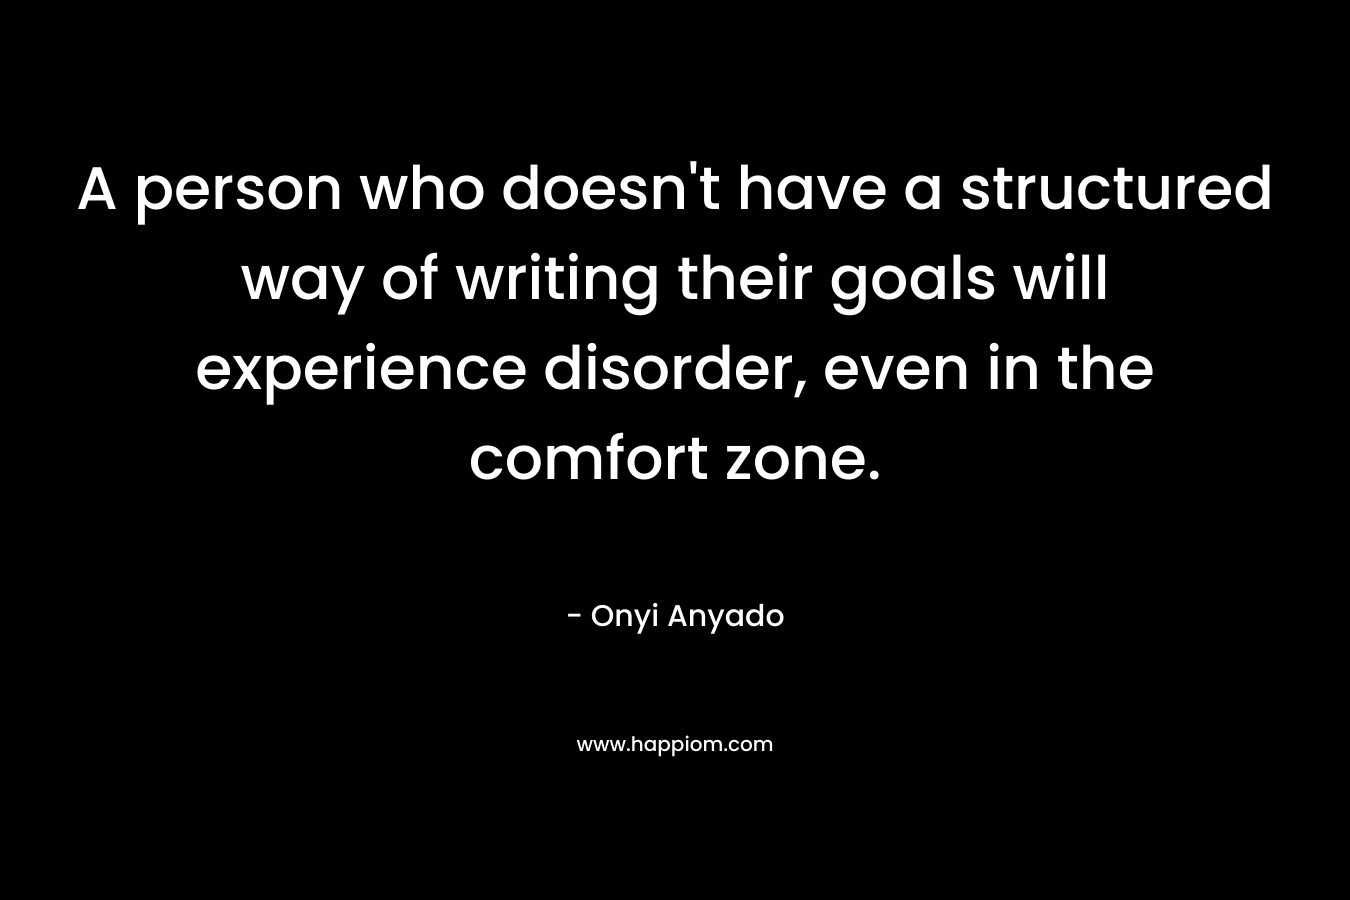 A person who doesn't have a structured way of writing their goals will experience disorder, even in the comfort zone.